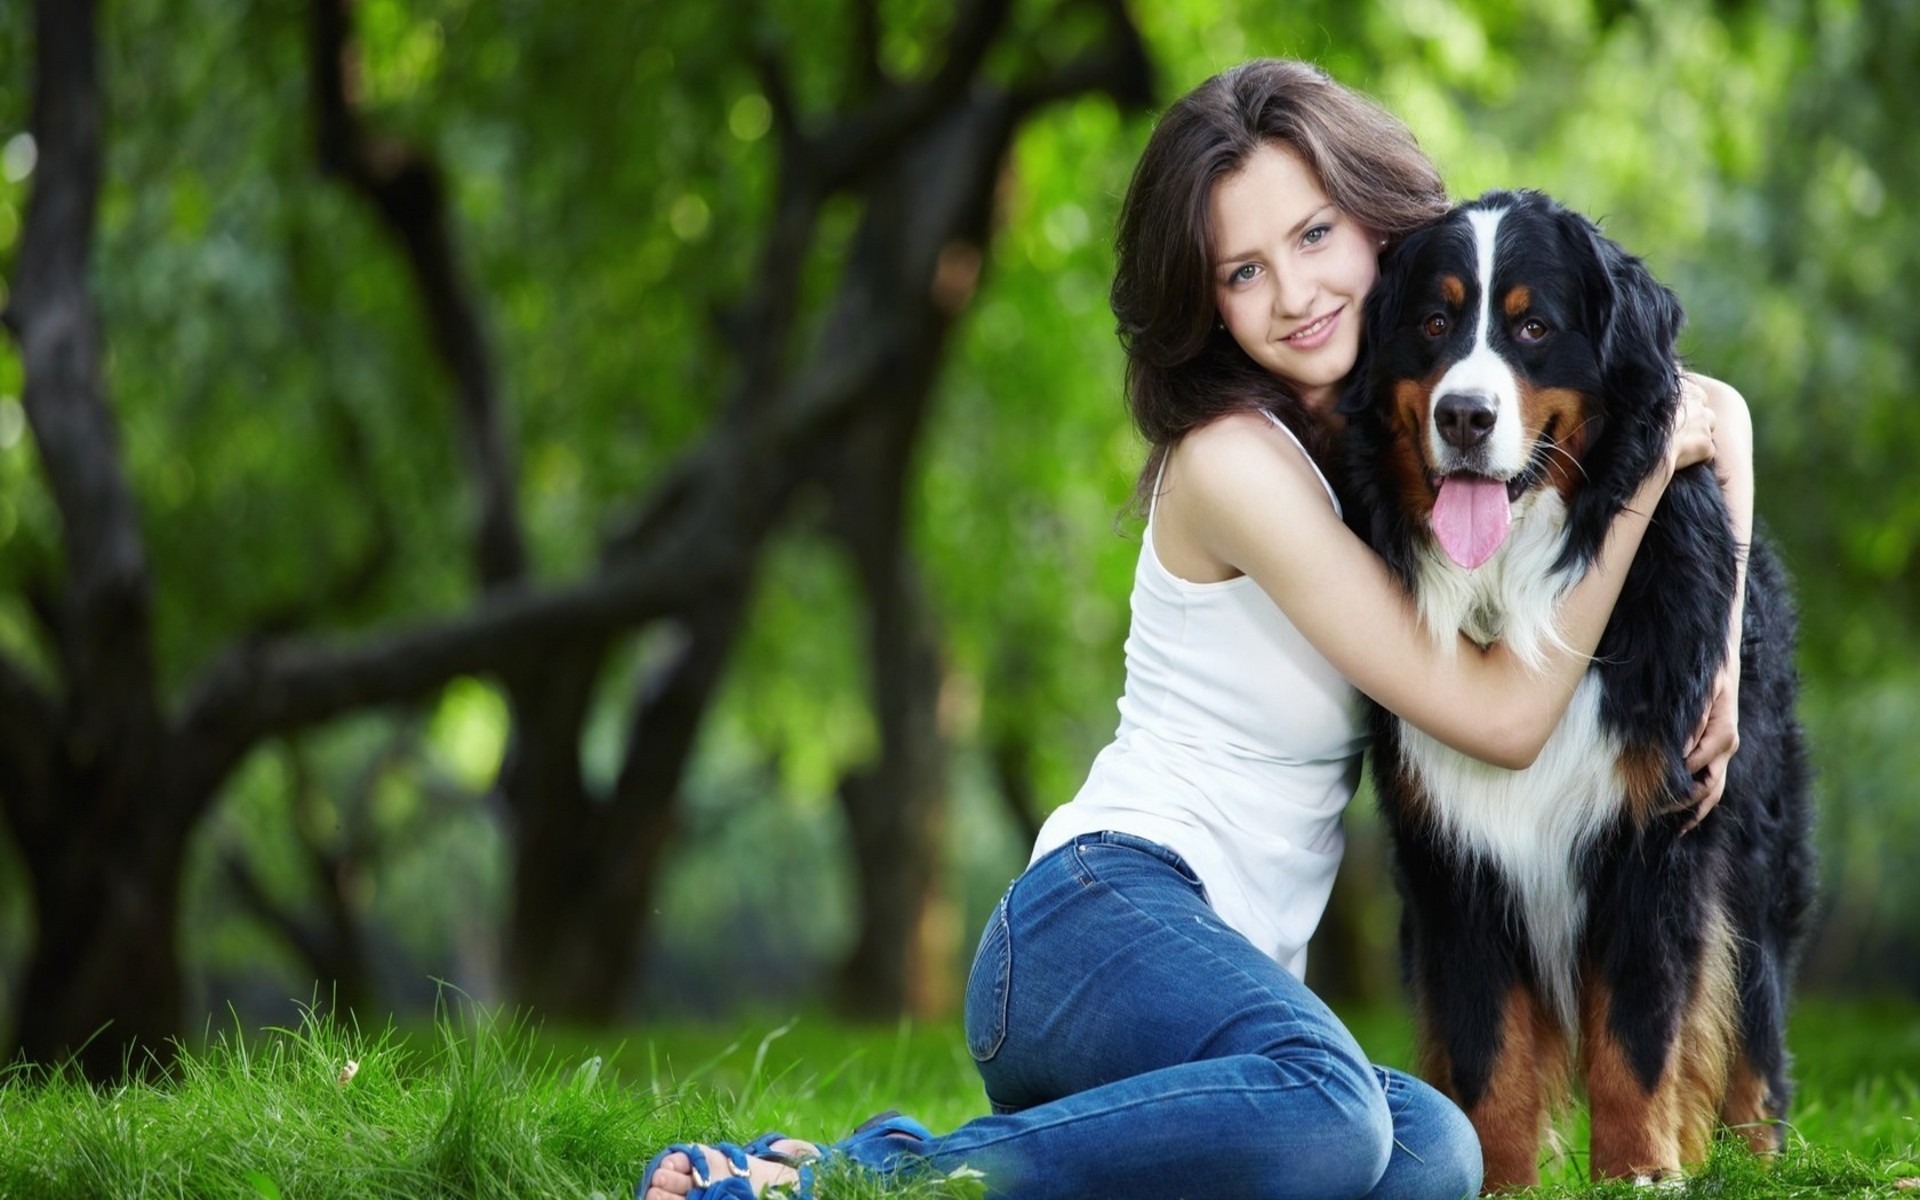 Wallpaper, forest, animals, women outdoors, looking at viewer, grass, sitting, jeans, tongues, dog like mammal, dog walking 1920x1200